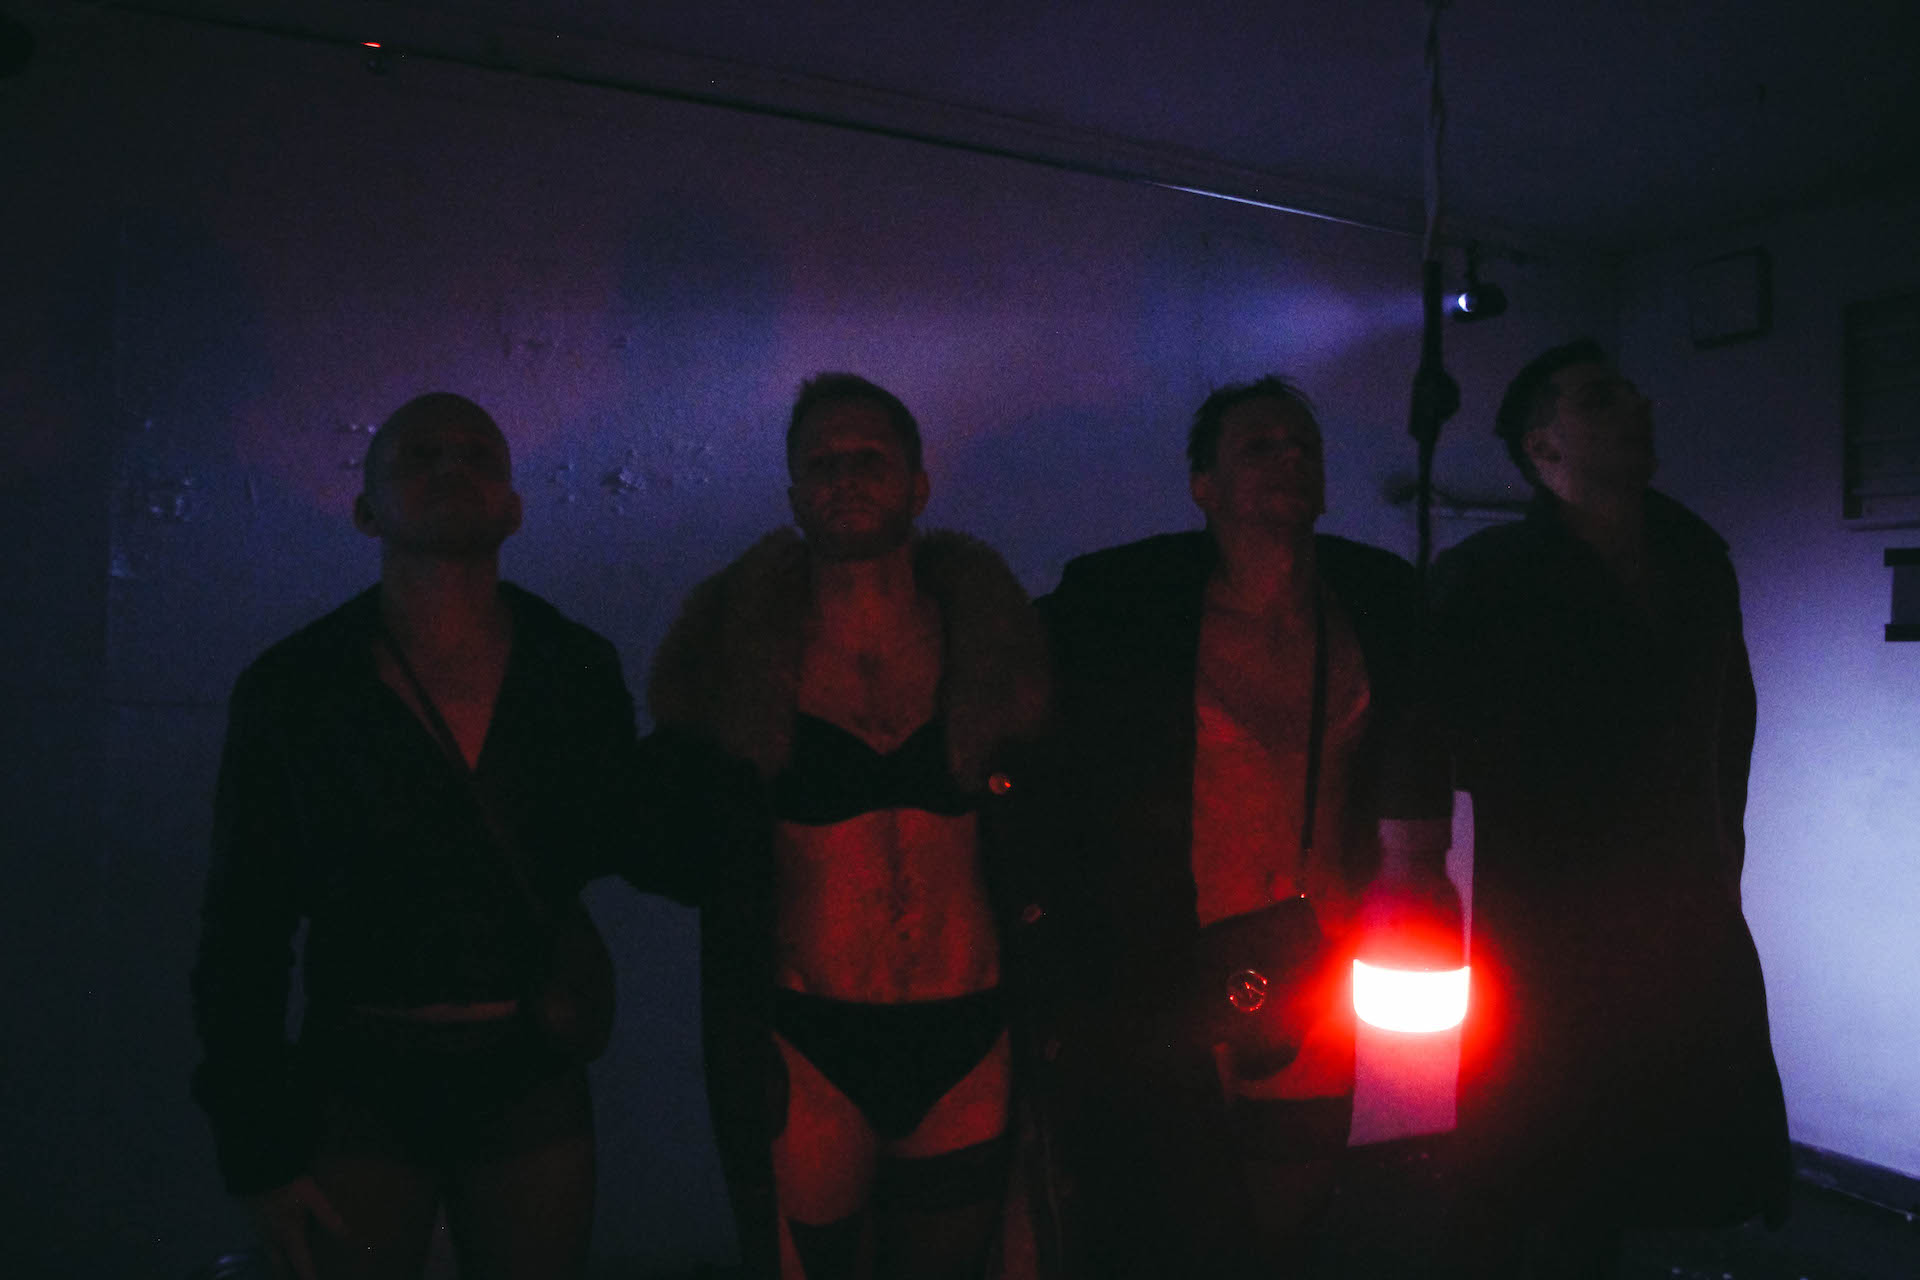 In a dark blue lighted room, a red light bulb is hanging by the ceiling. Four performers are standing behind the light bulb in one line. They are all wearing underwear and long jackets